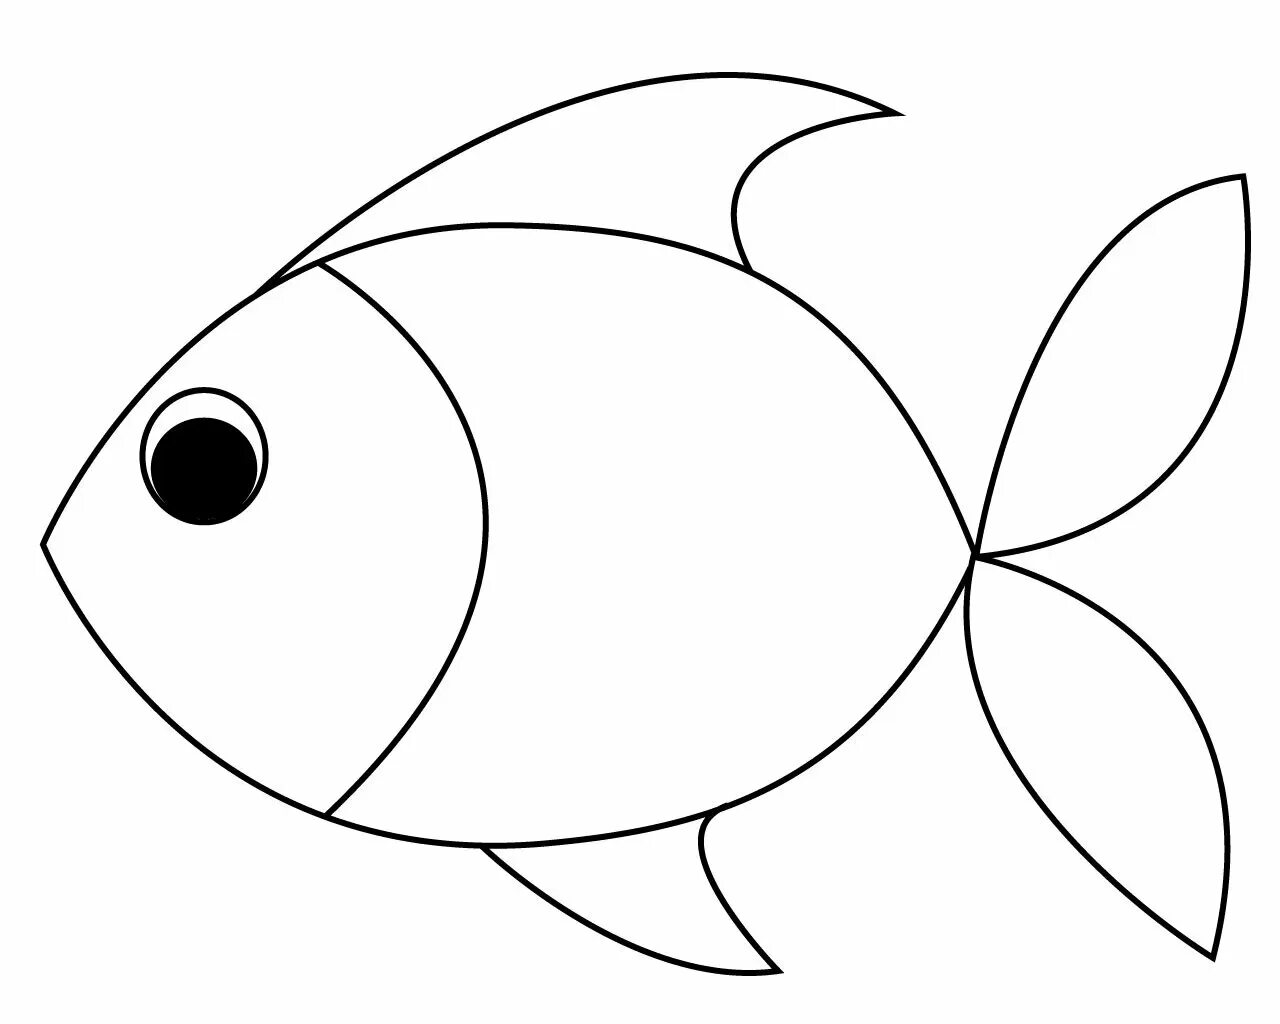 Relaxing fish coloring page